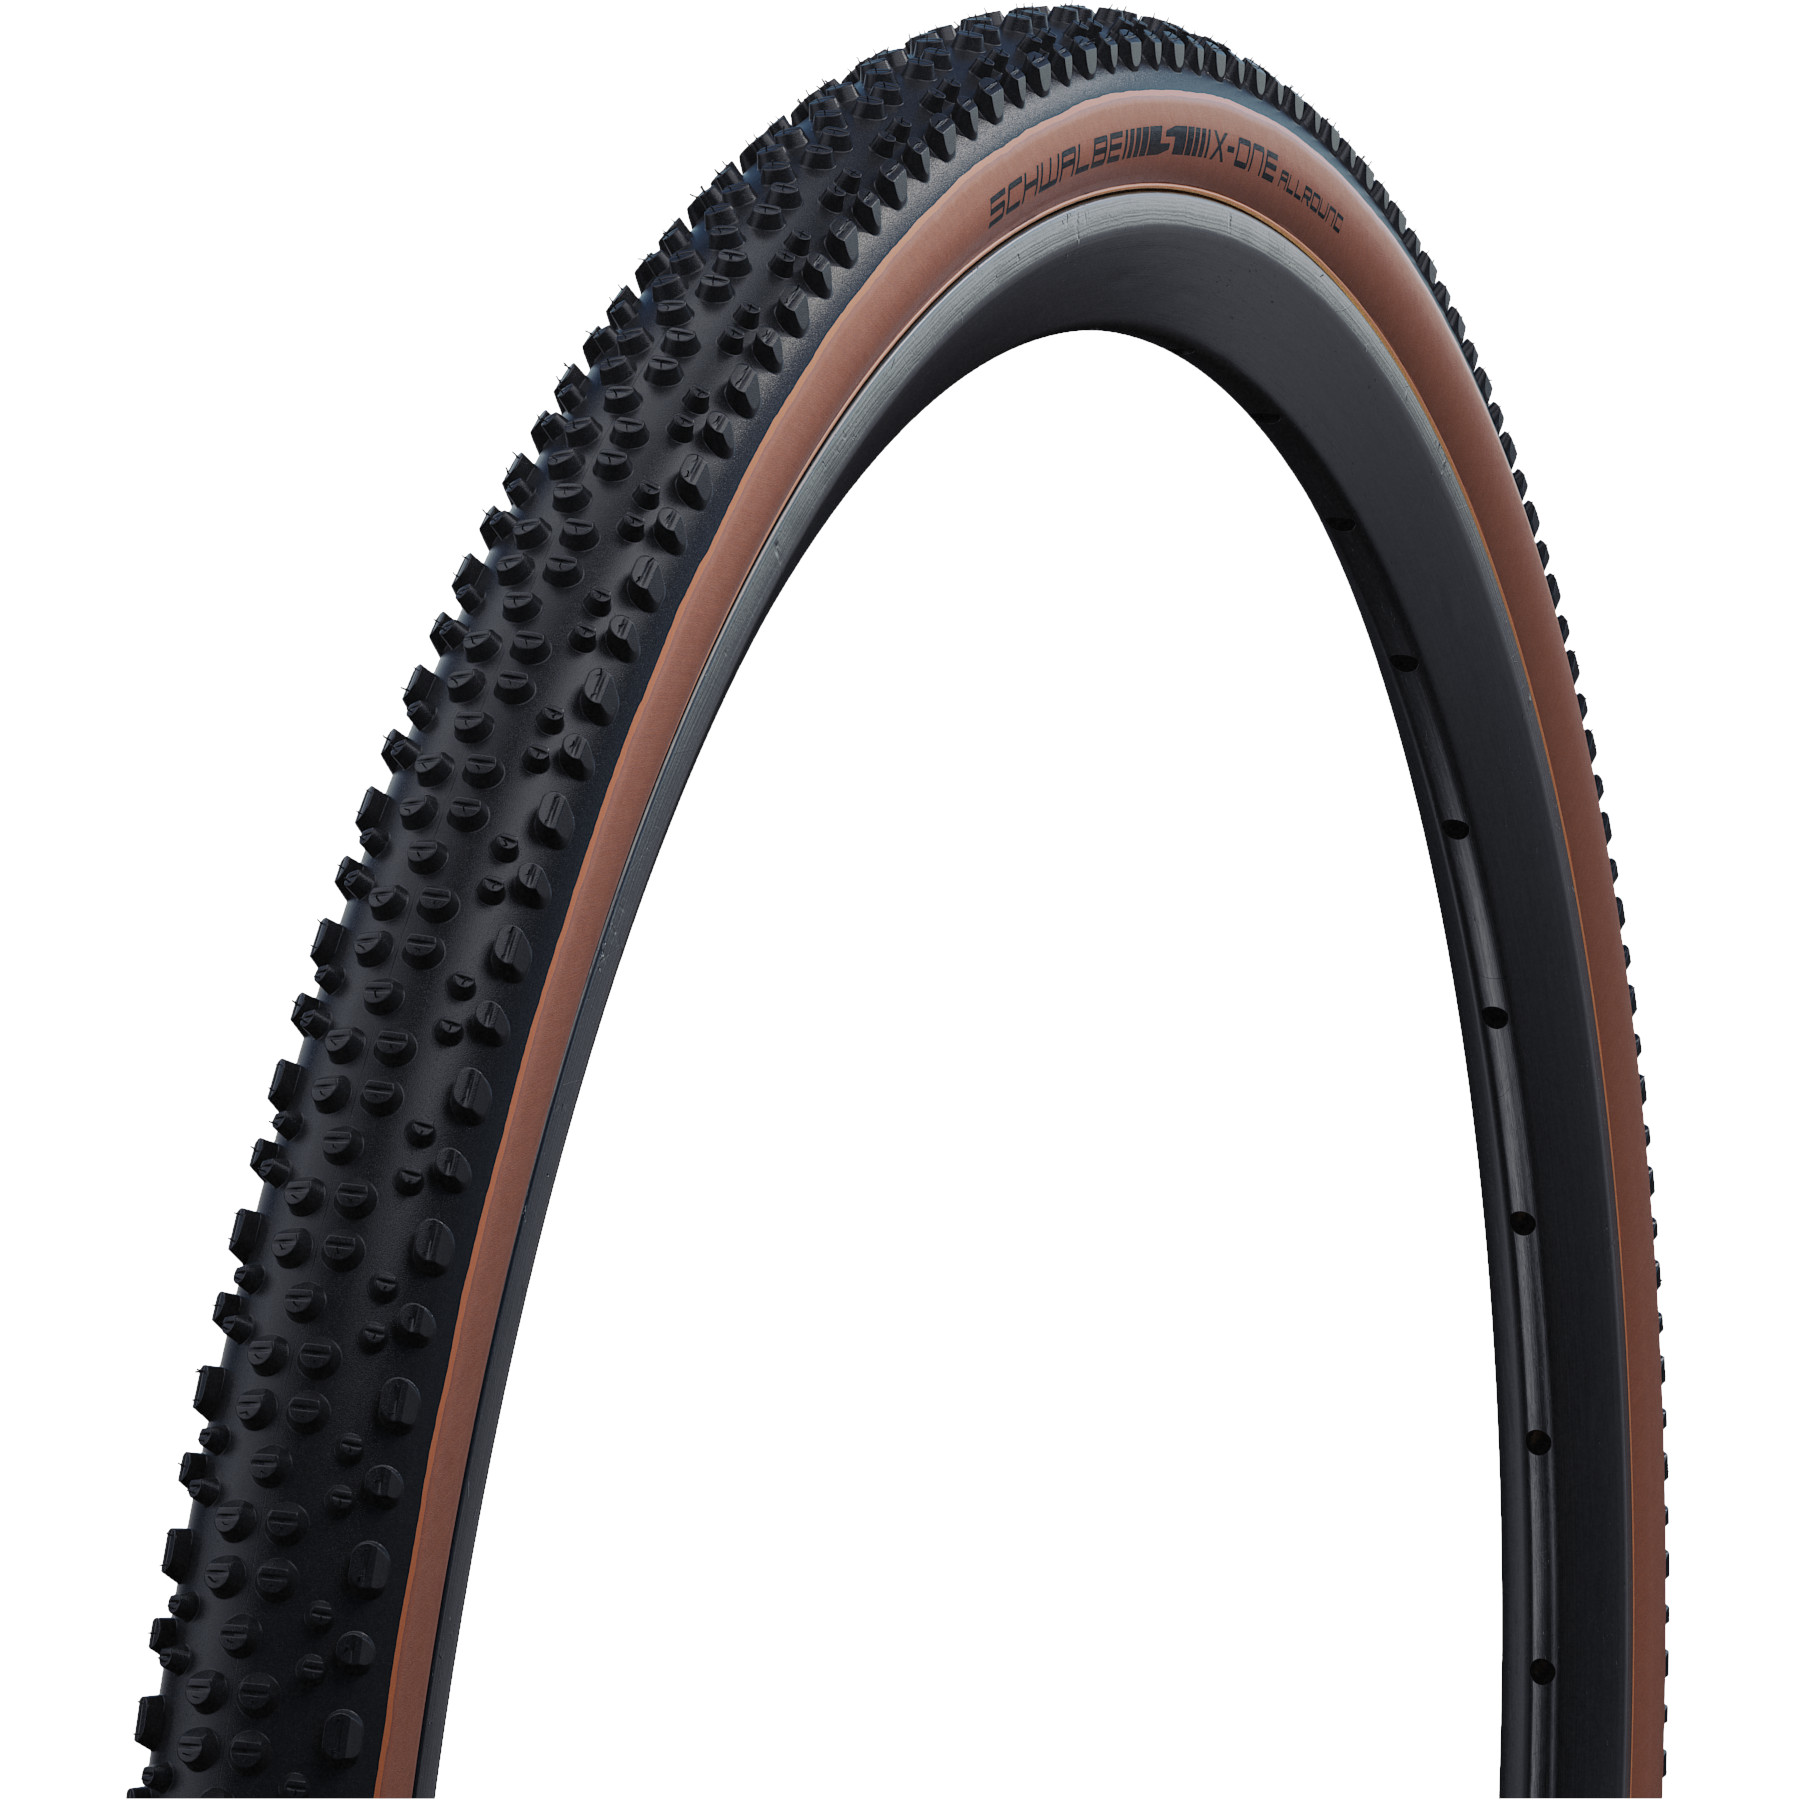 Picture of Schwalbe X-One Allround Folding Tire - Performance | Addix | Race Guard | TLEasy - 33-622 | Bronze Sidewall